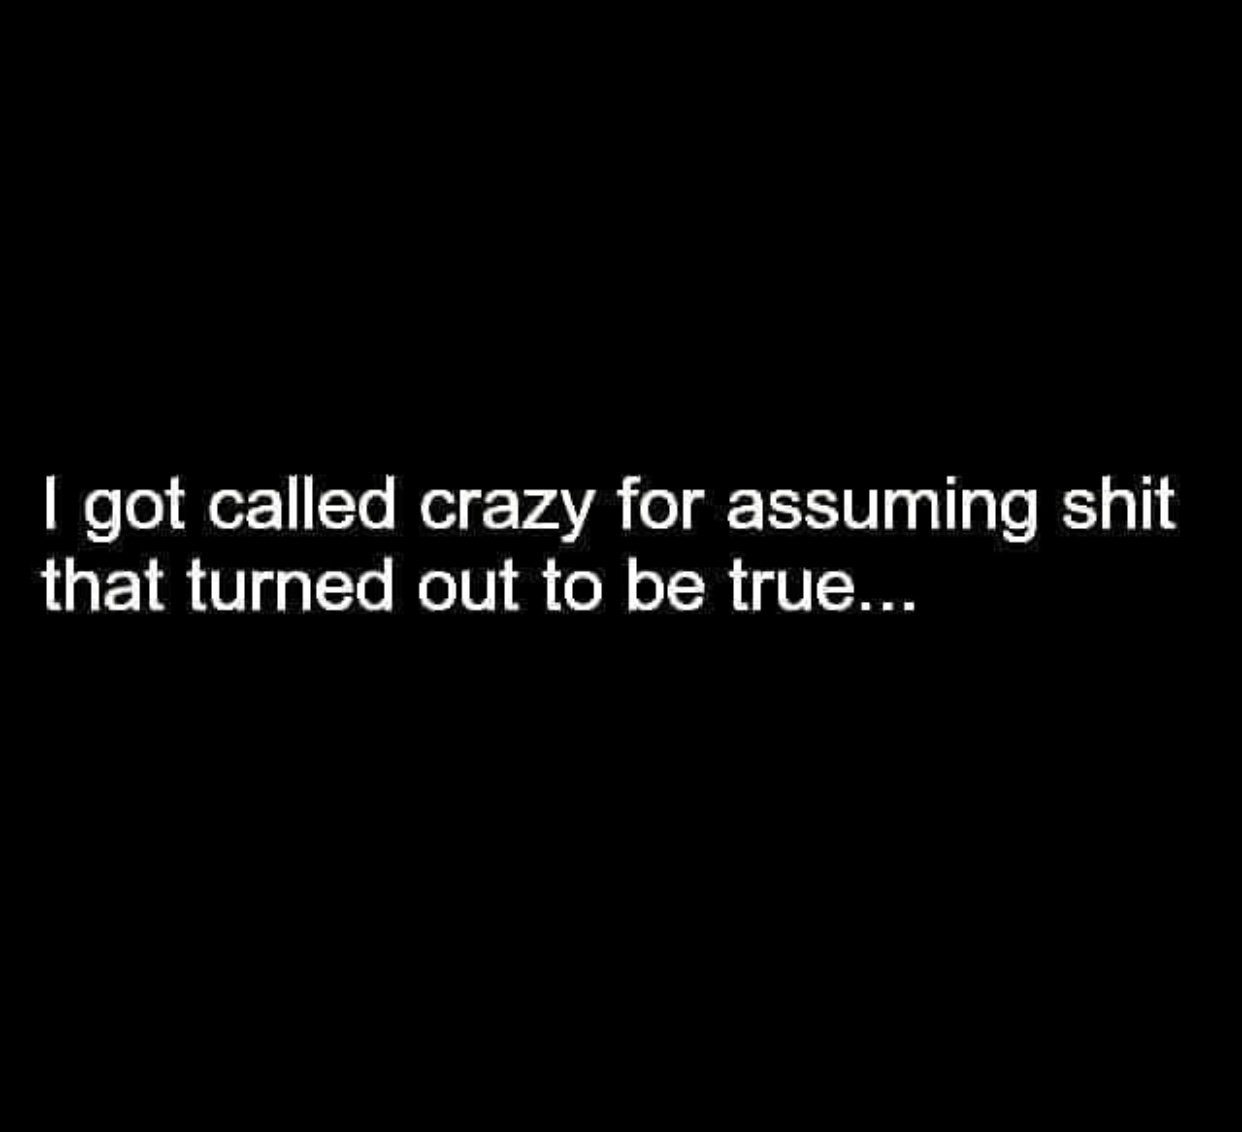 funniest voicemail ever - I got called crazy for assuming shit that turned out to be true...